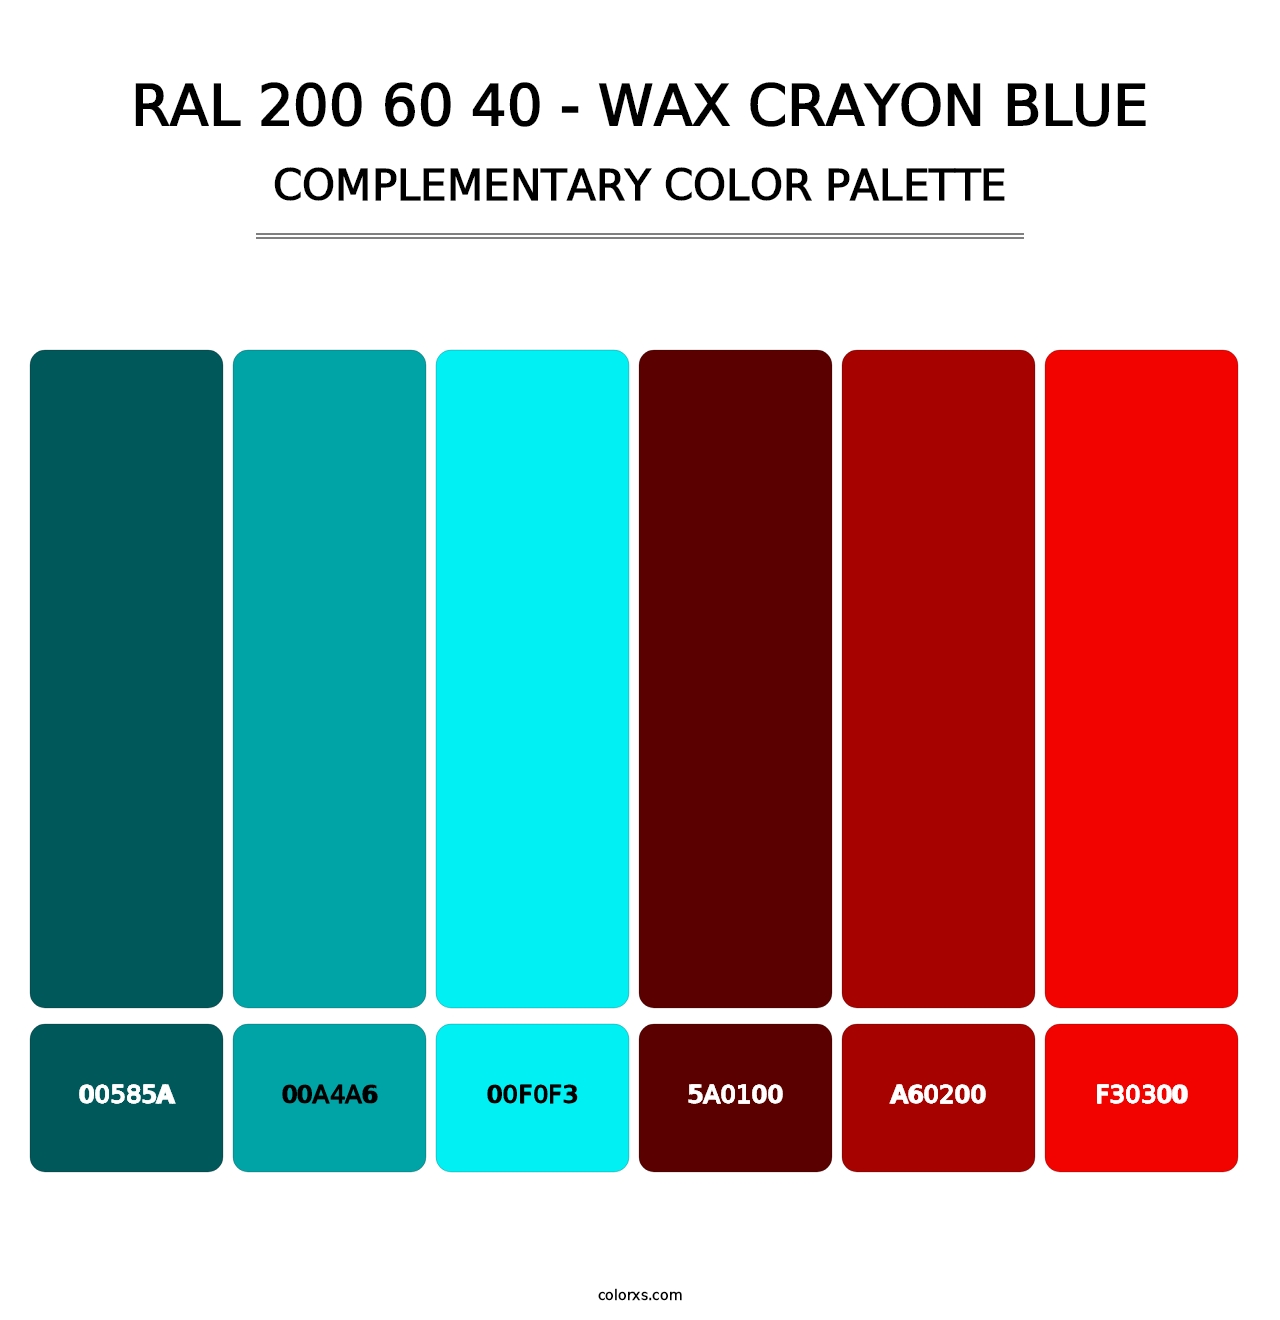 RAL 200 60 40 - Wax Crayon Blue - Complementary Color Palette